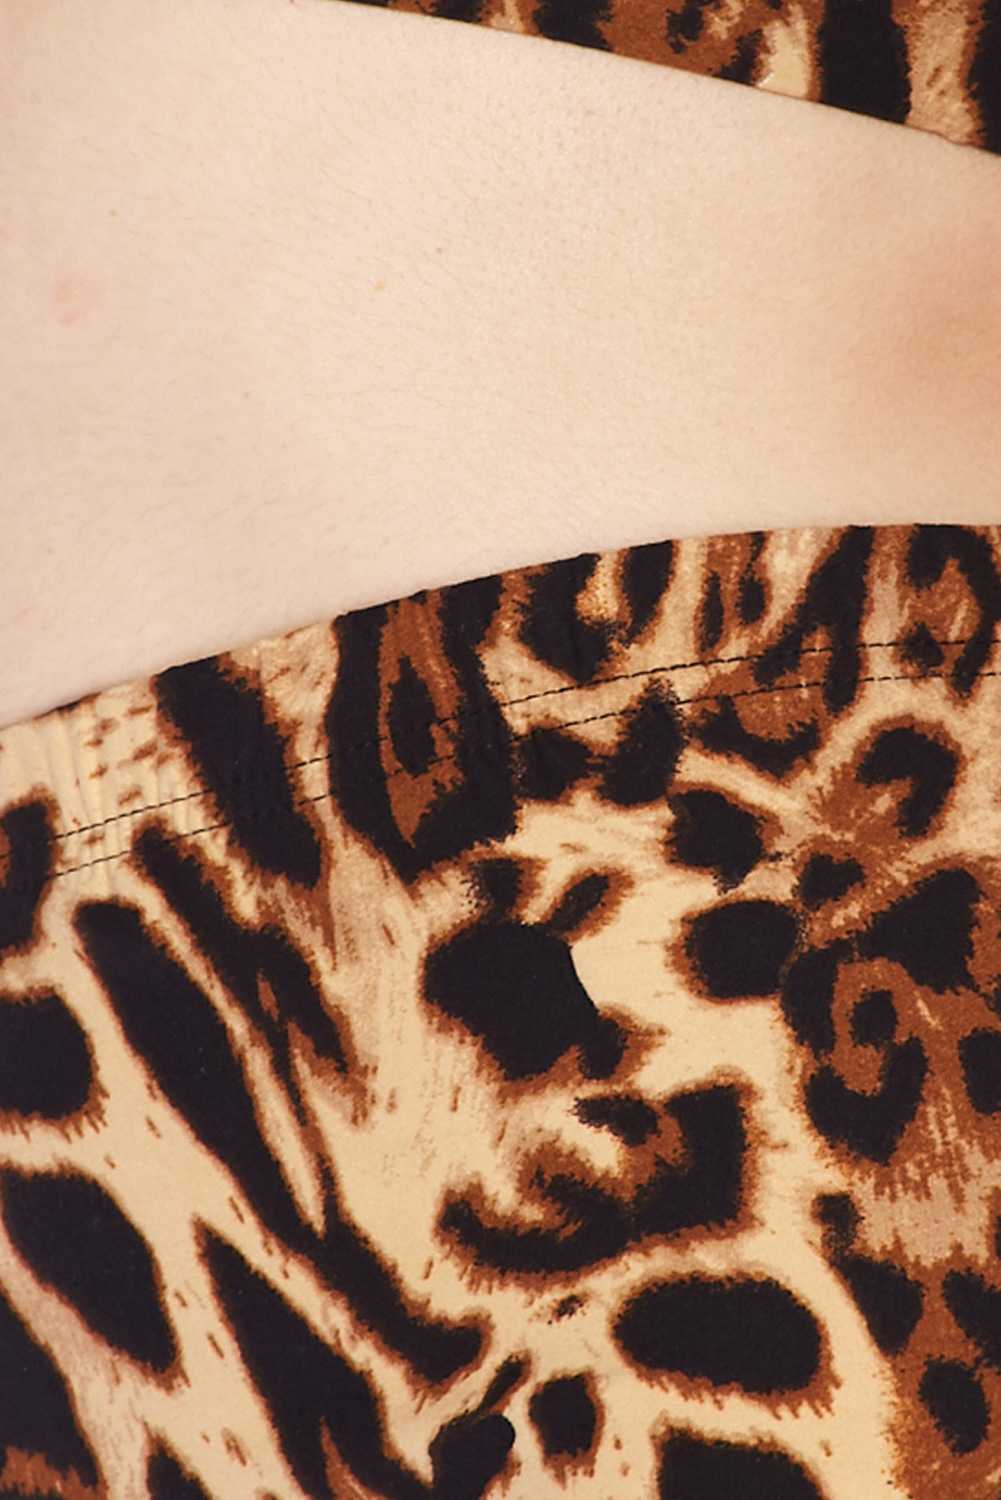 Wholesale Buttery Smooth Predator Leopard Leggings and Bra Set